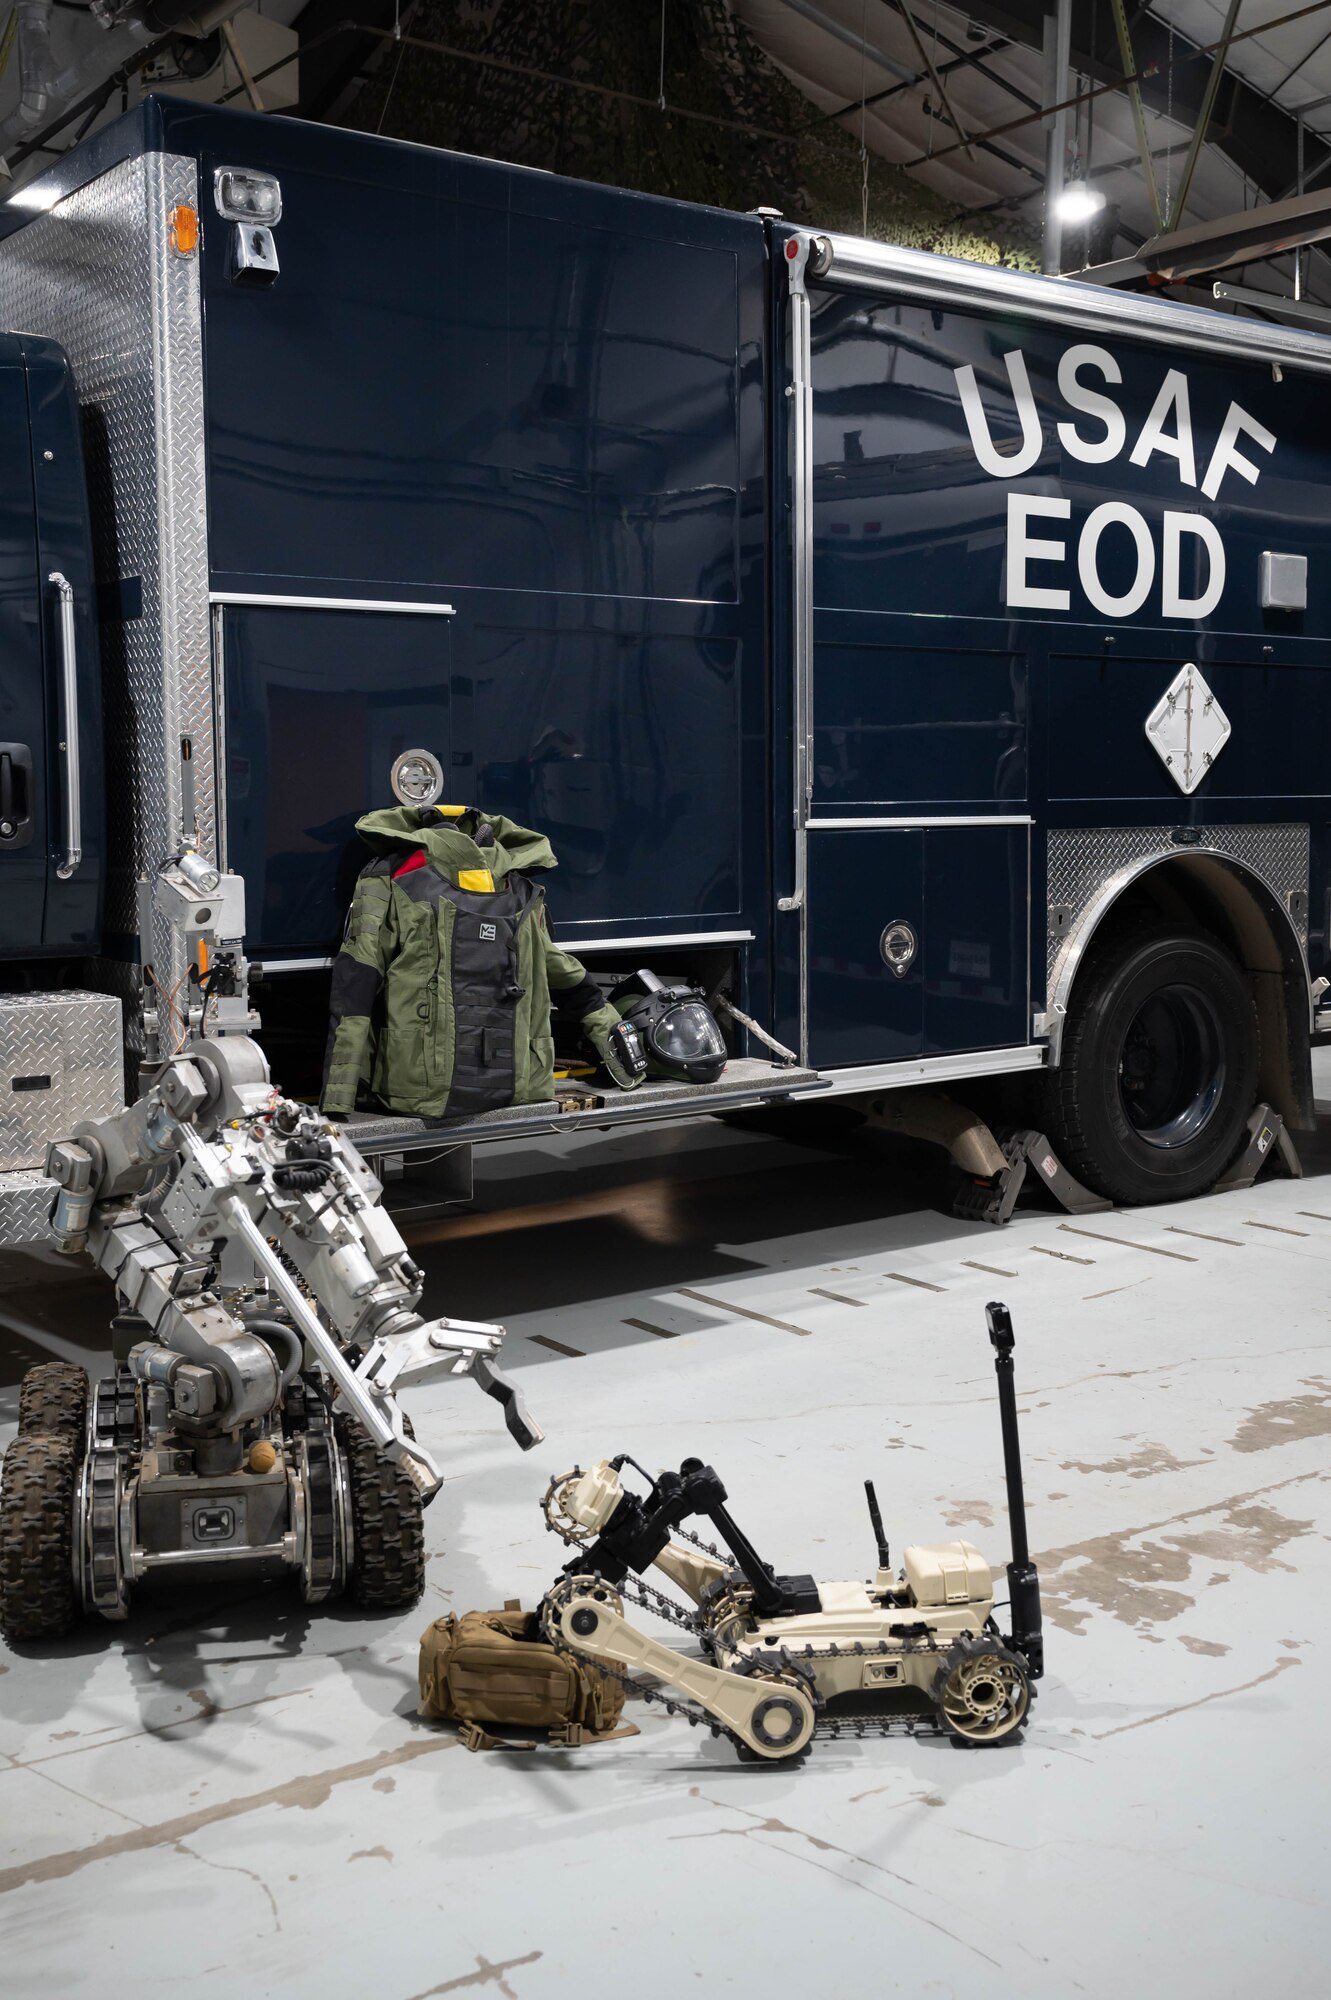 341st Civil Engineer Squadron explosive ordnance disposal equipment is on display June 2, 2021, at Malmstrom Air Force Base, Mont.